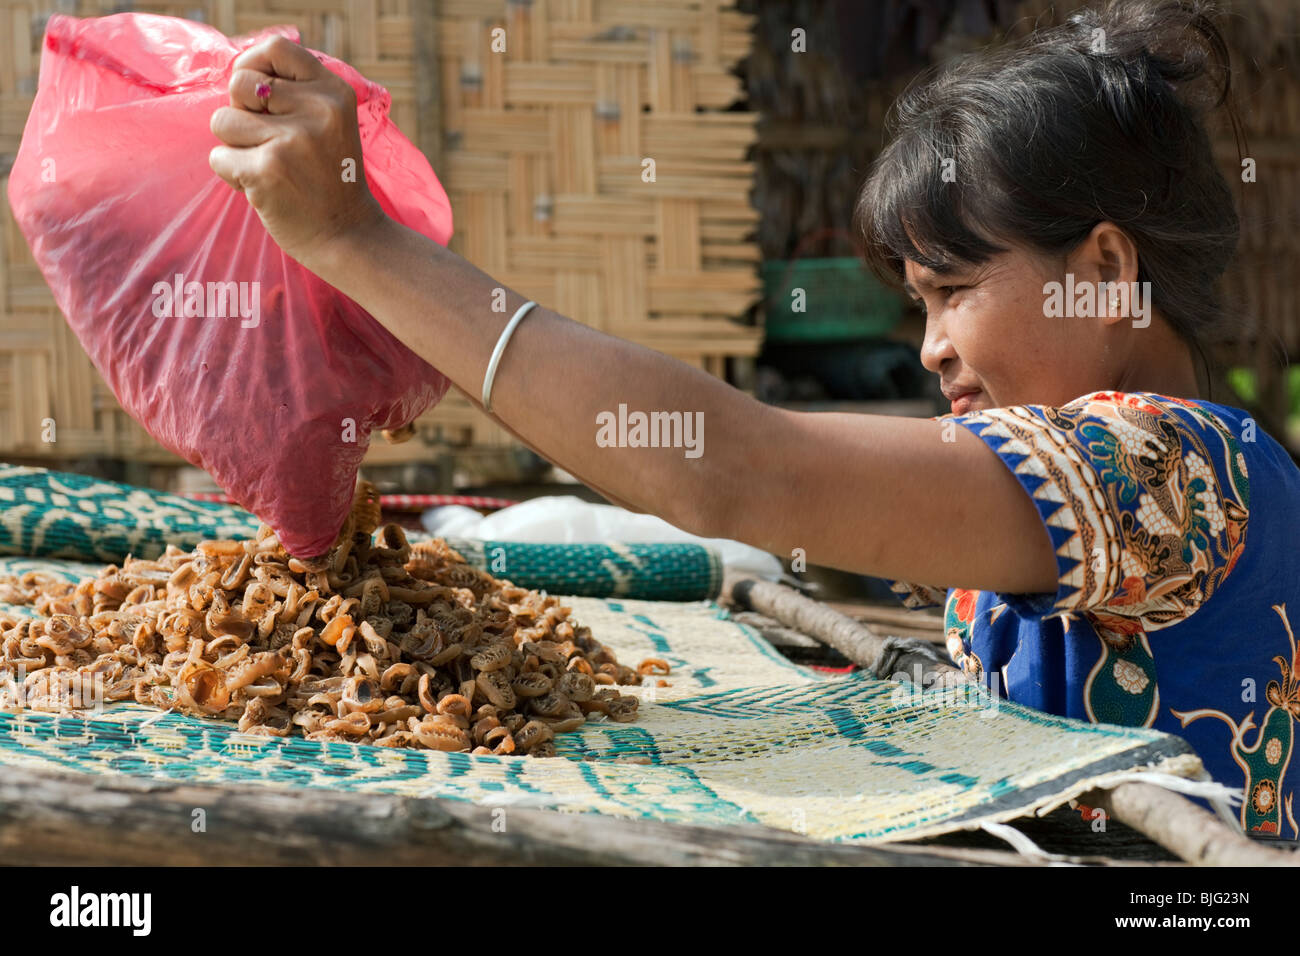 Myanmar sea-gypsies, the nomadic hunter-gatherers of South East Asia displaying her wares at a market Stock Photo